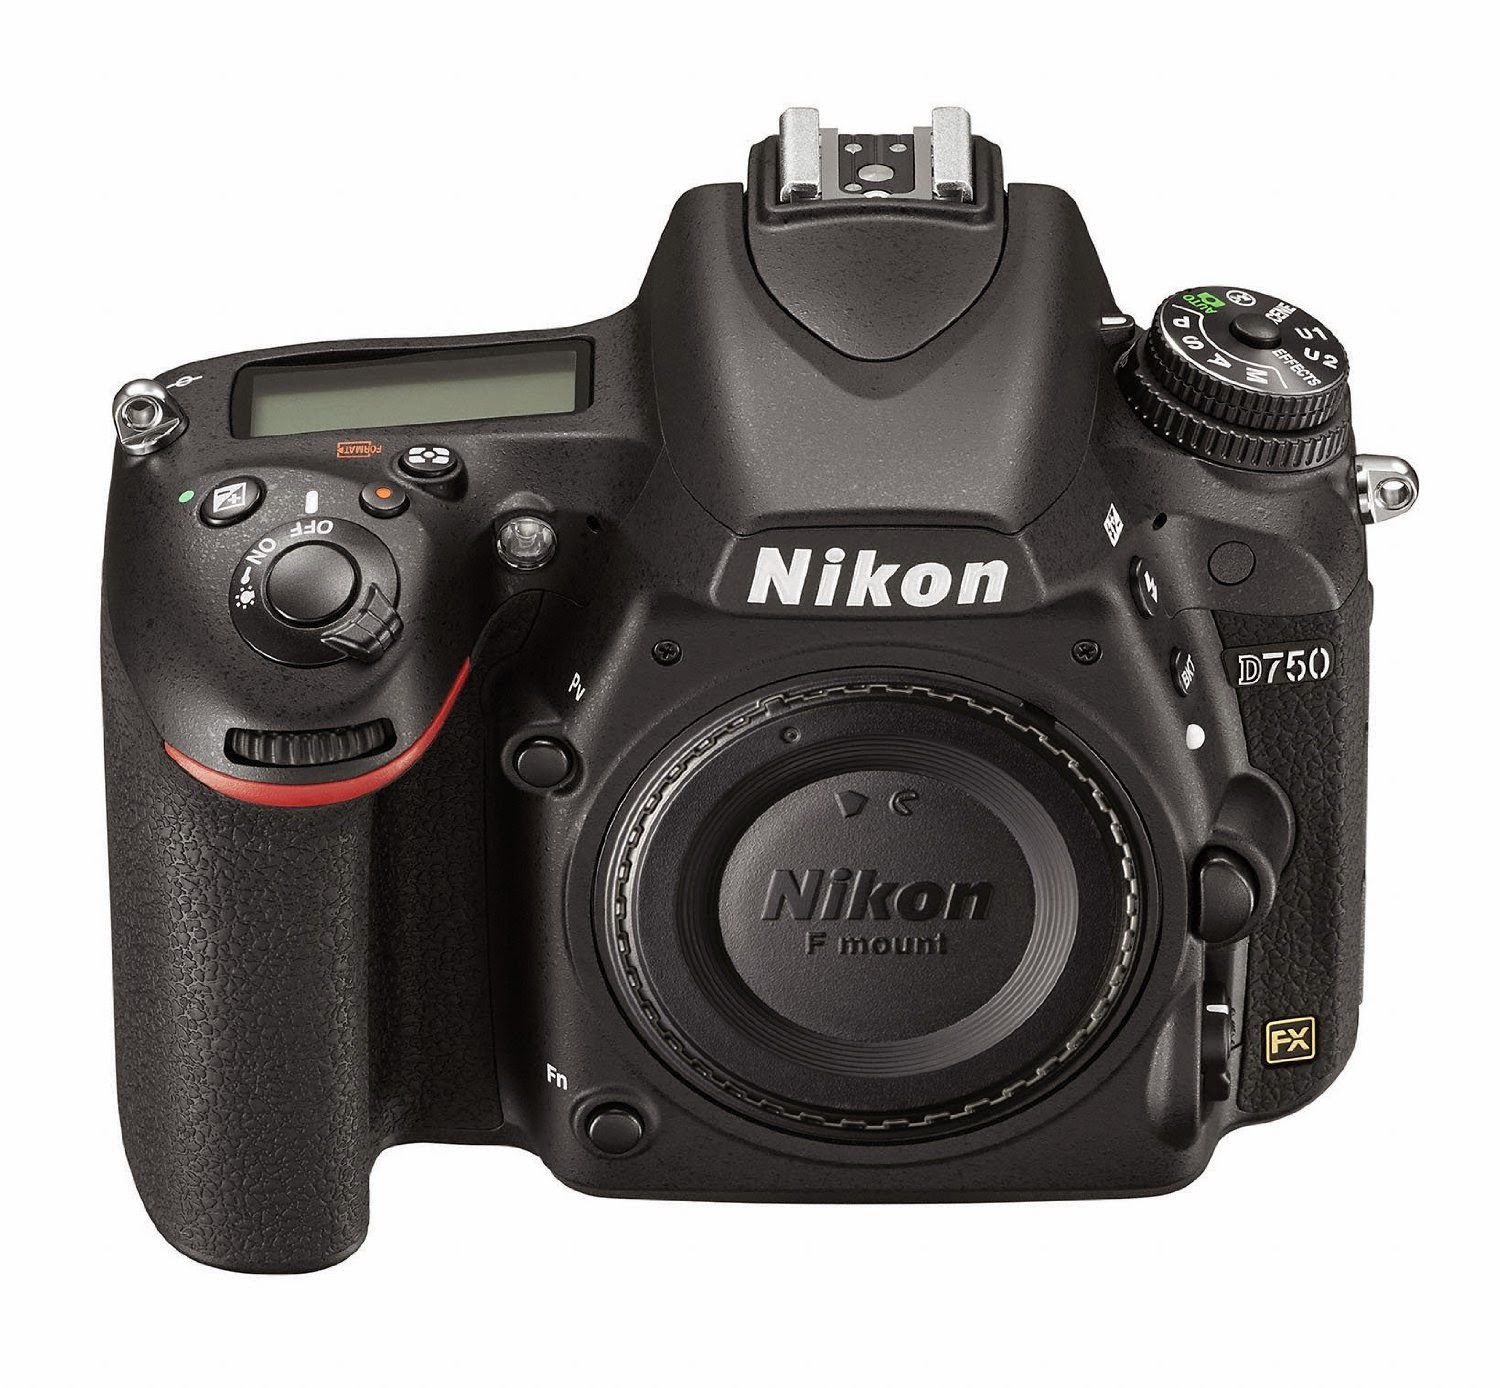 Nikon D750 FX-format Digital SLR Camera, front view, picture, review, with built in Wi-Fi, slim compact lightweight full-frame DSLR. 24.3 MP